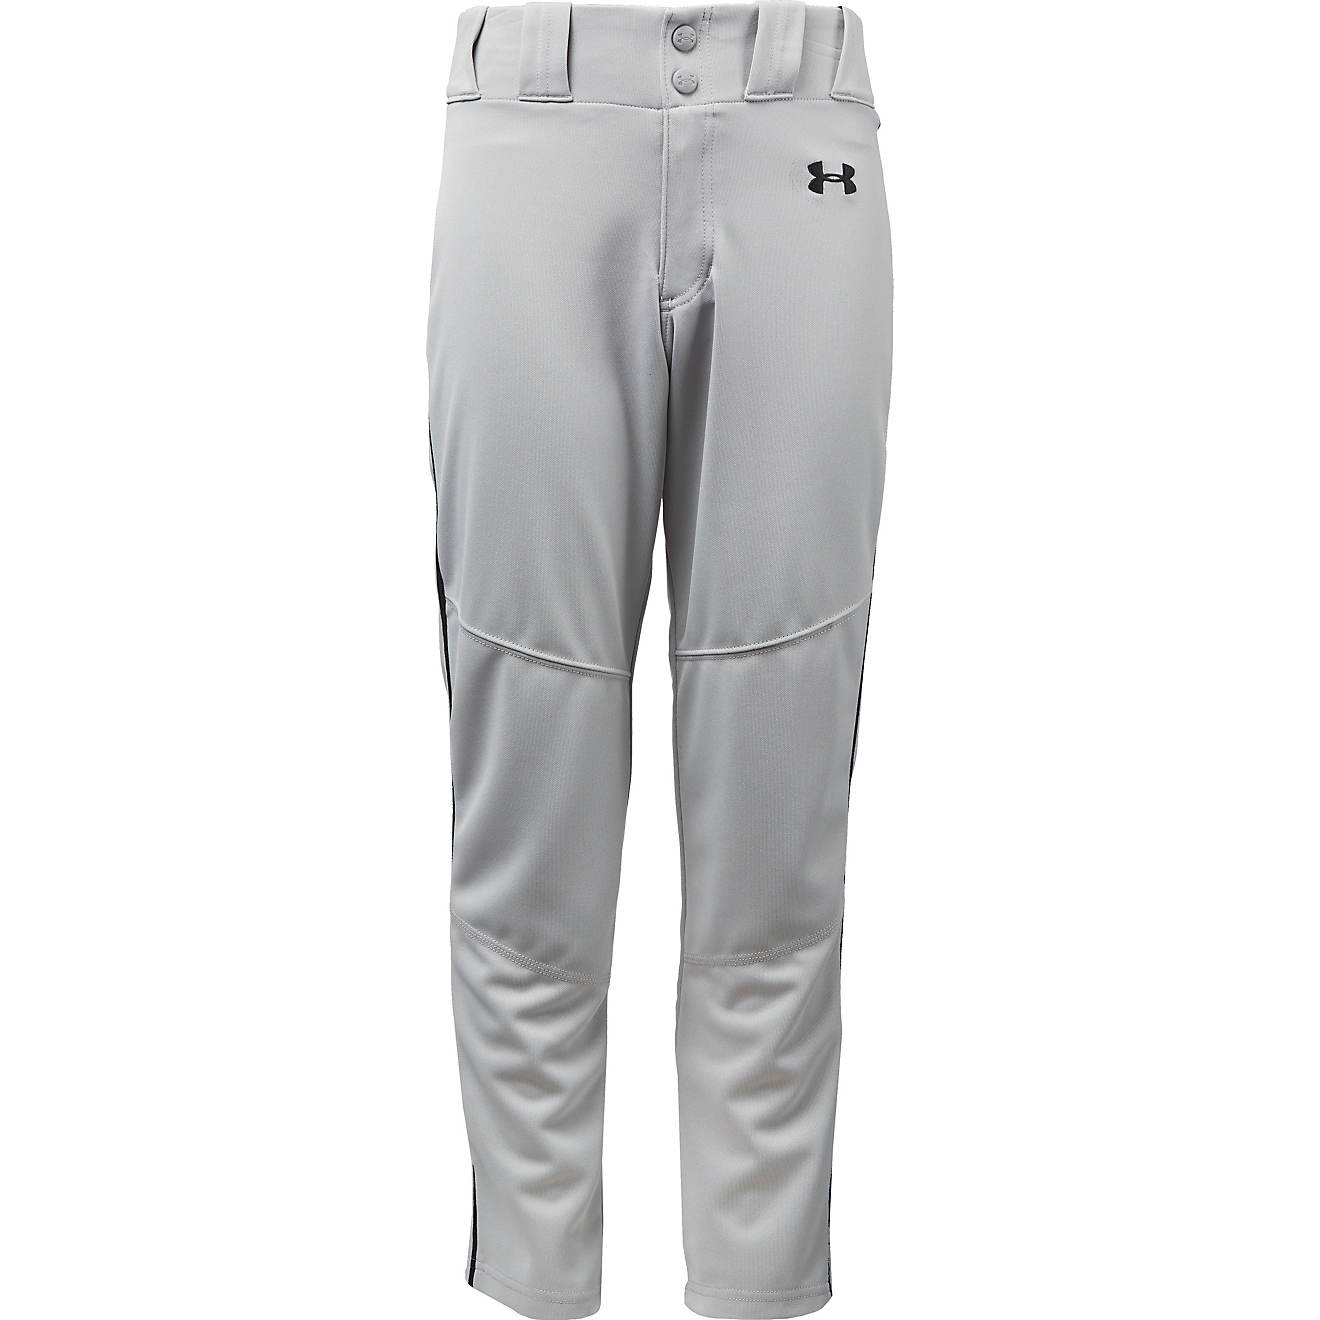 Under Armour Boys' Heater Piped Baseball Pants 